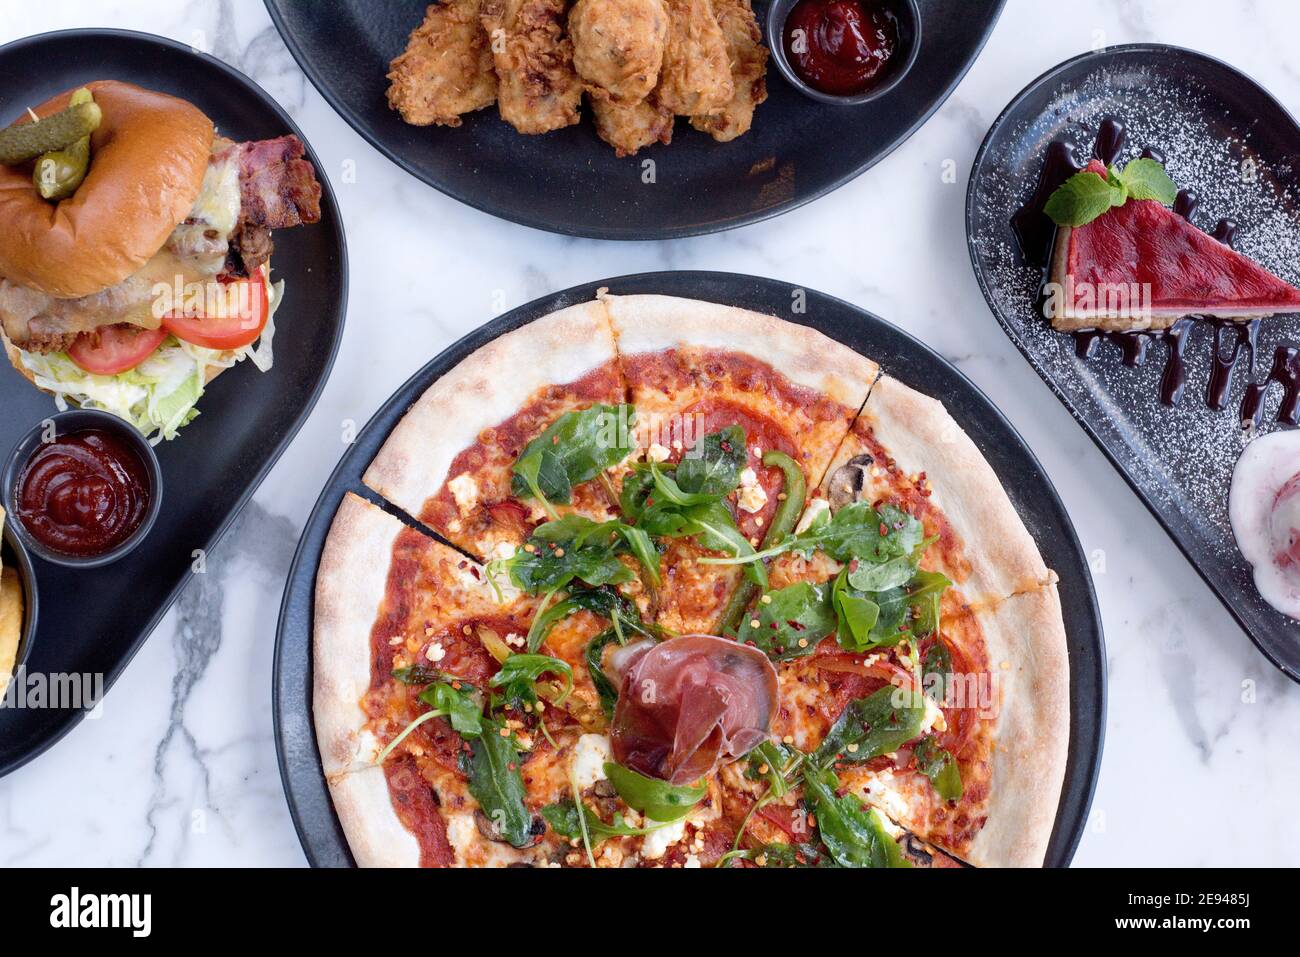 Sheffield, UK - 03 Aug 2017: pepperoni salami and rocket pizza, SFC, cheeseburger and fries and cheesecake at OHM, Fitzwilliam Street Stock Photo